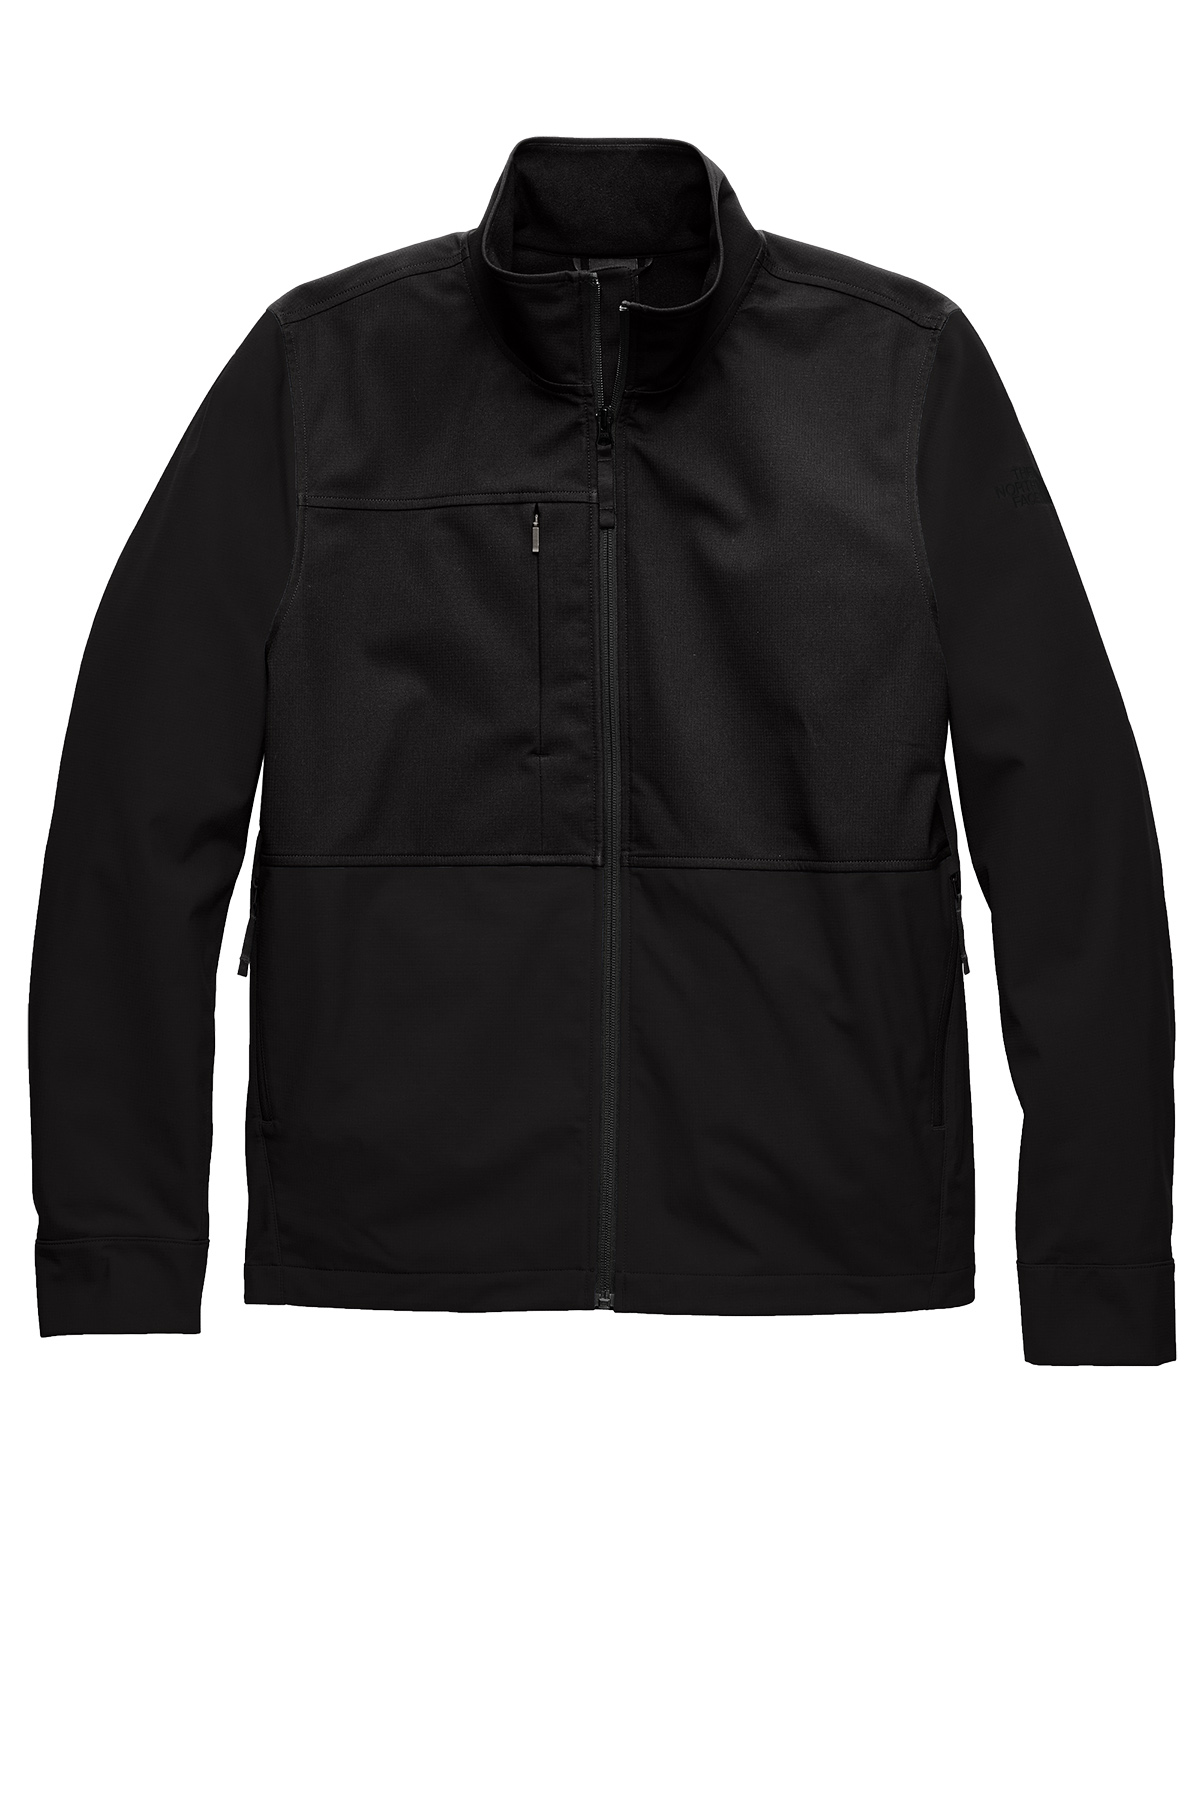 Branded The North Face Castle Rock Soft Shell Jacket The North Face Black